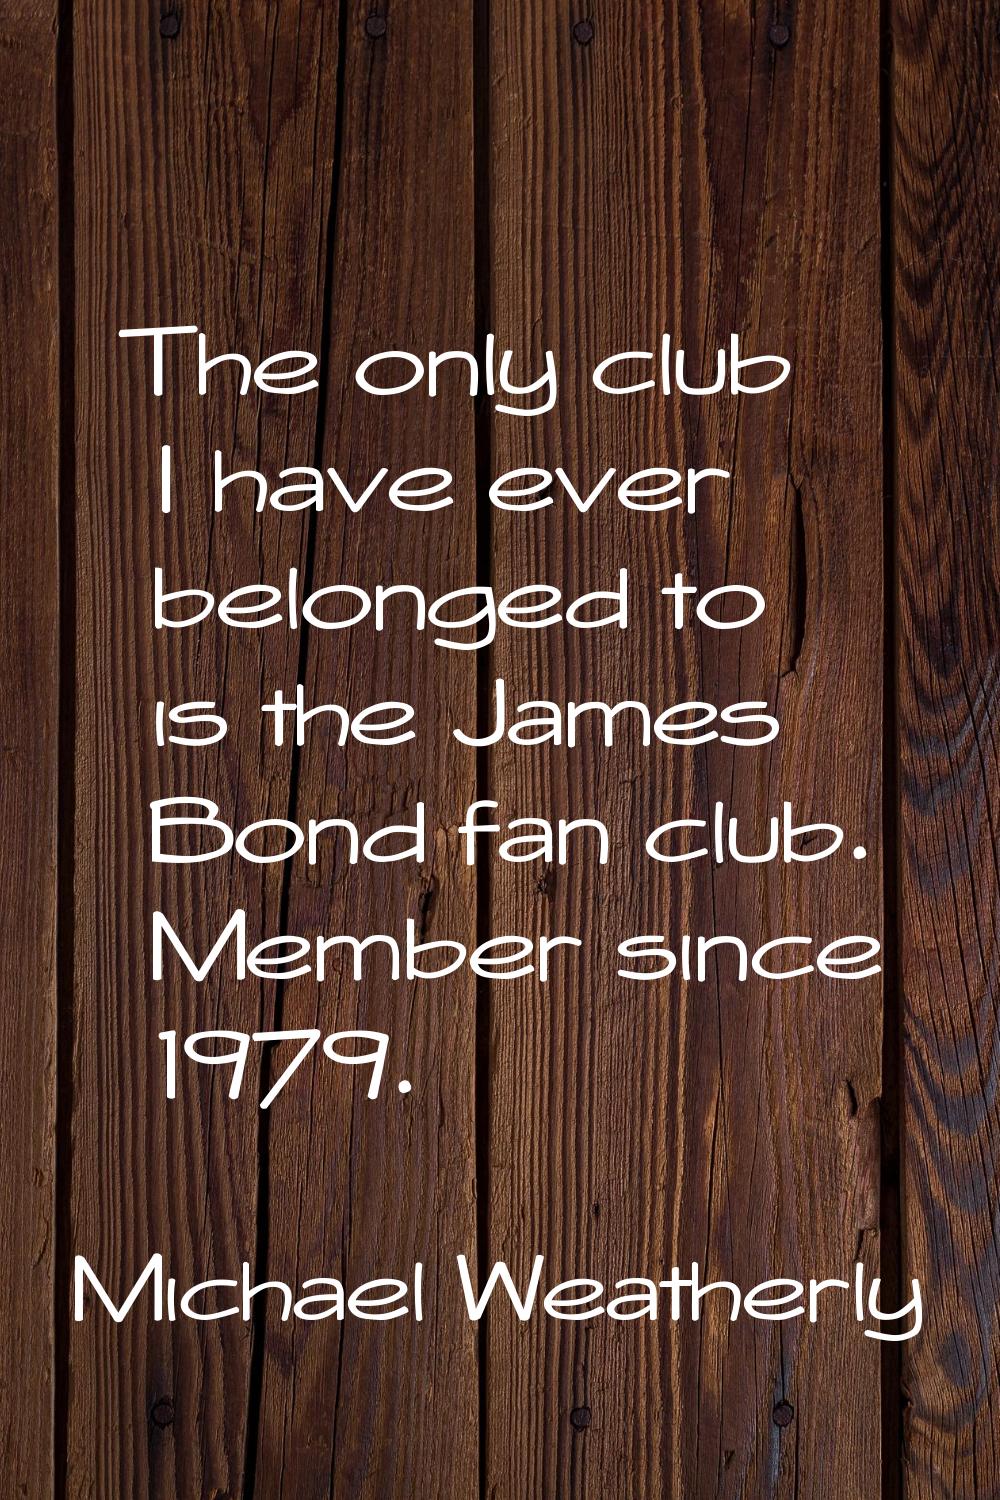 The only club I have ever belonged to is the James Bond fan club. Member since 1979.